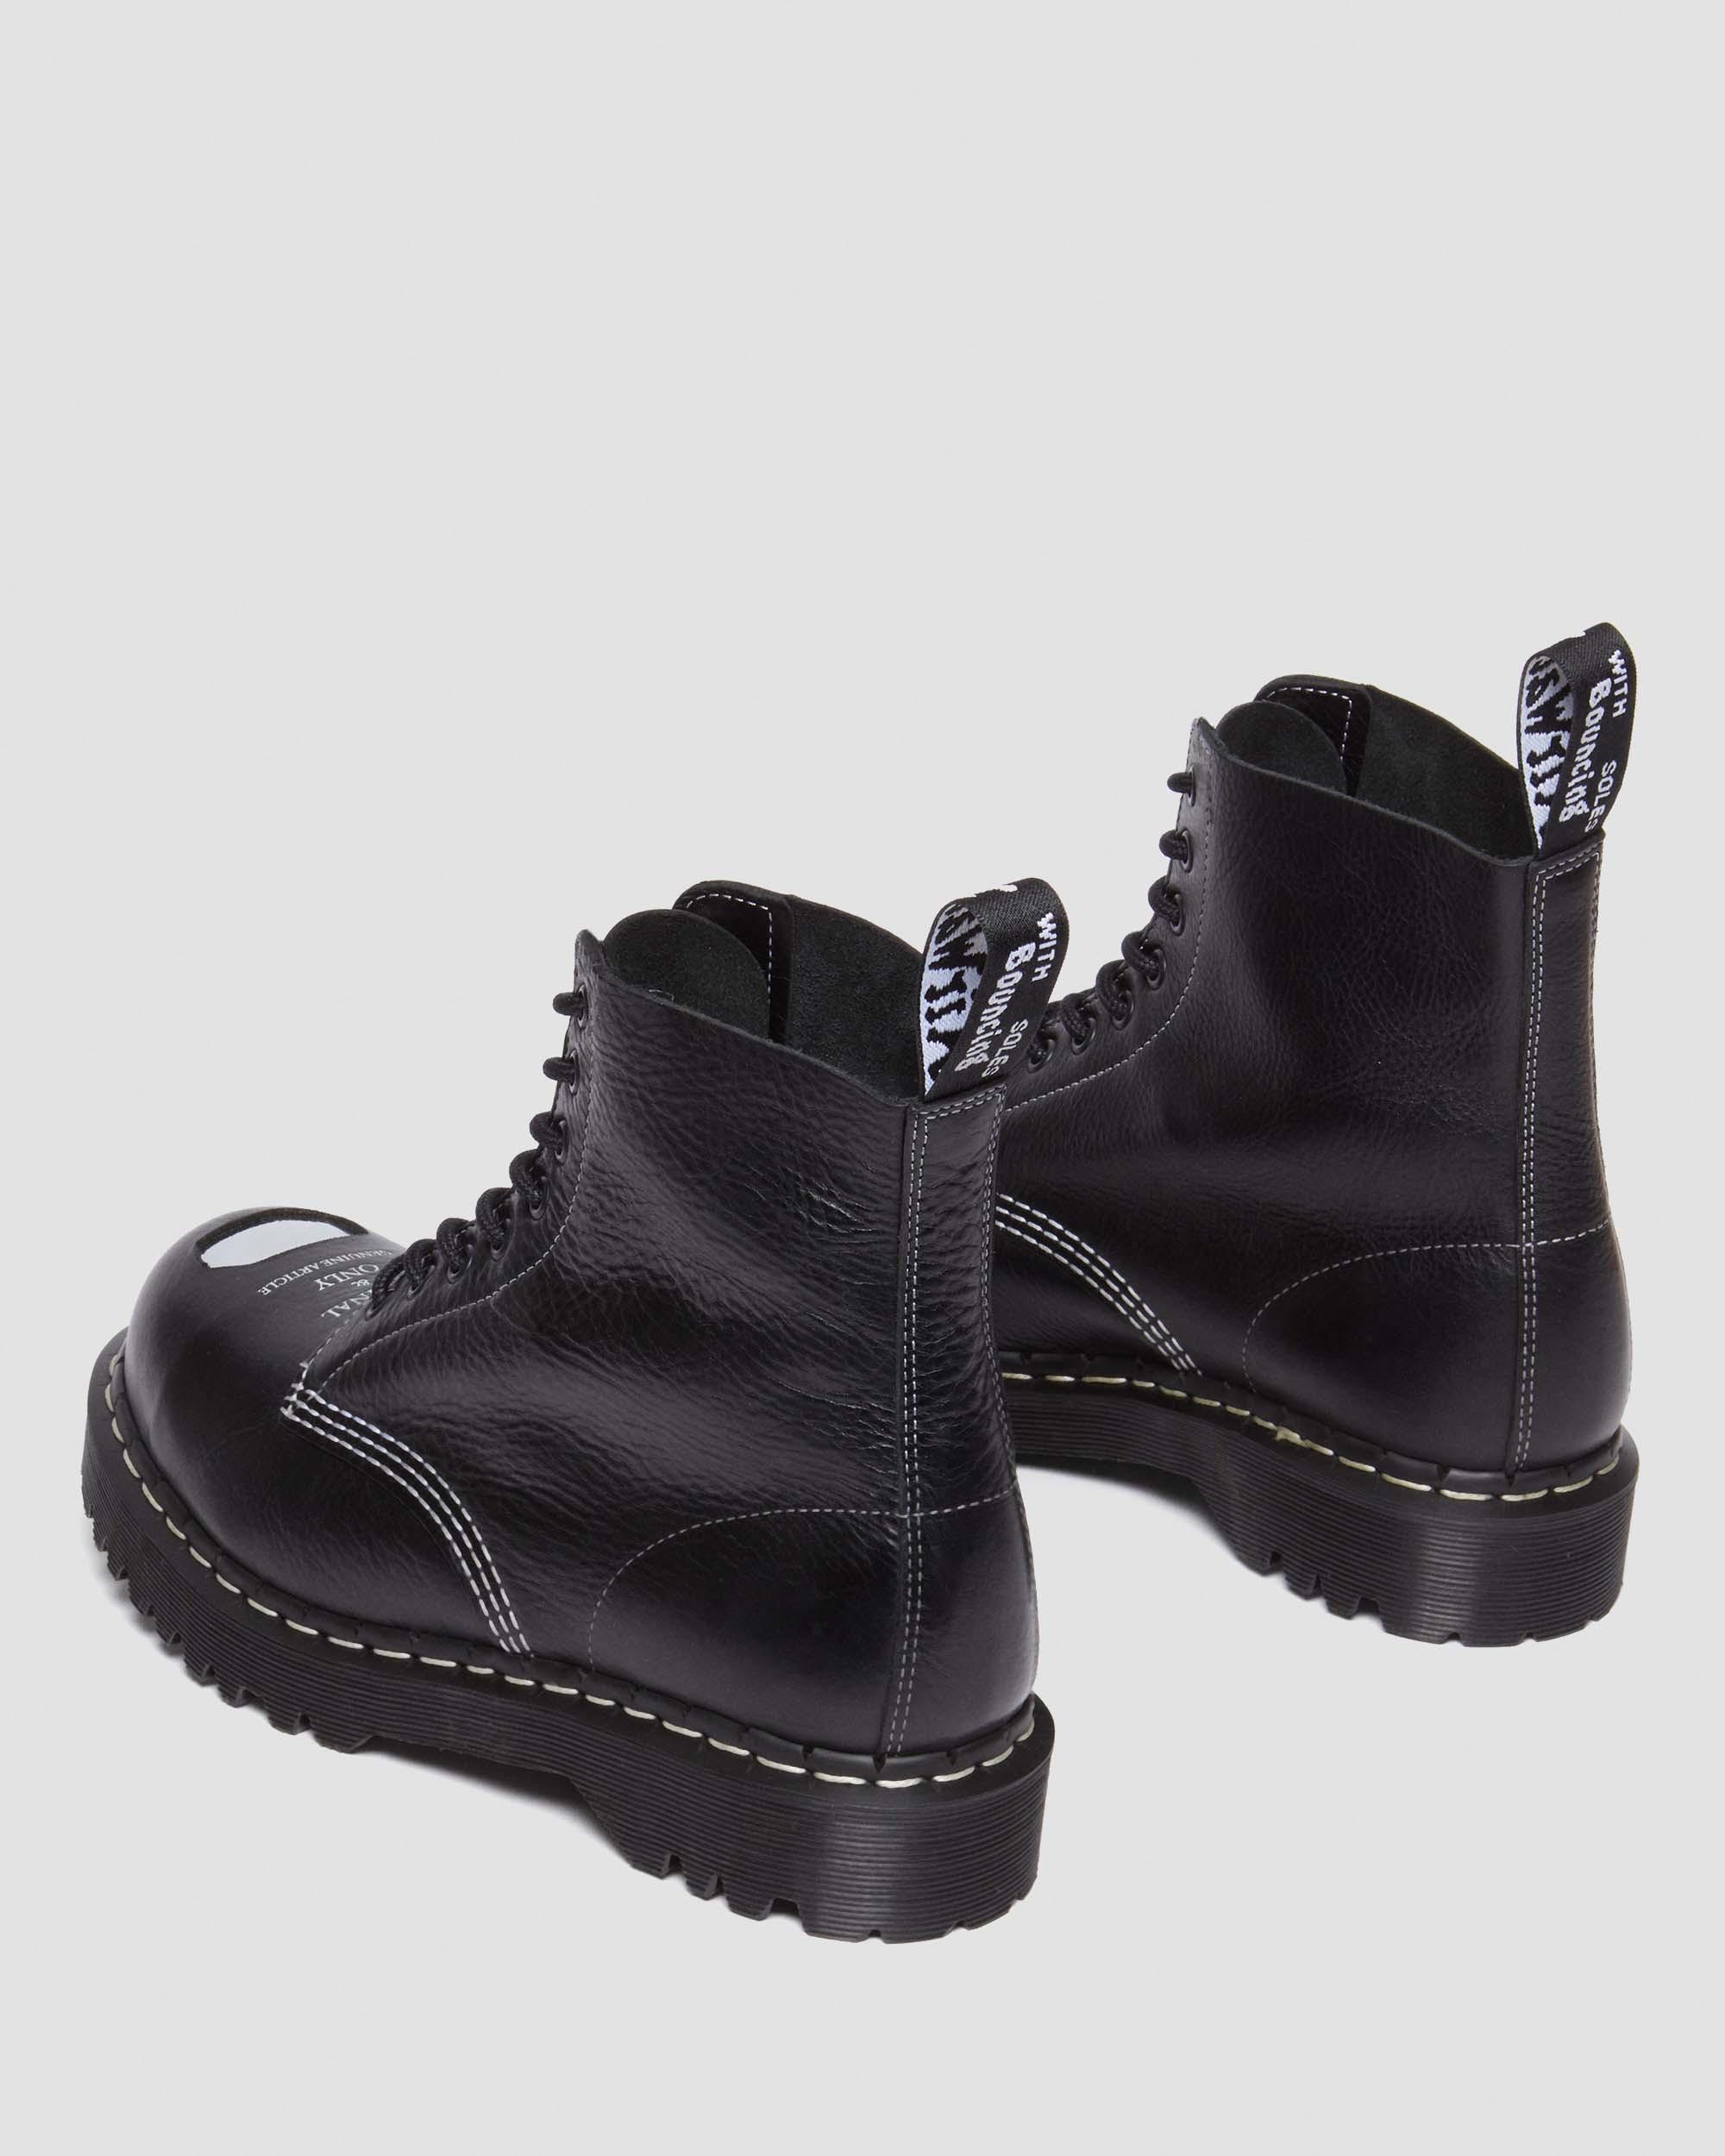 1460 Pascal Bex Steel Toe Leather Lace Up Boots in Black